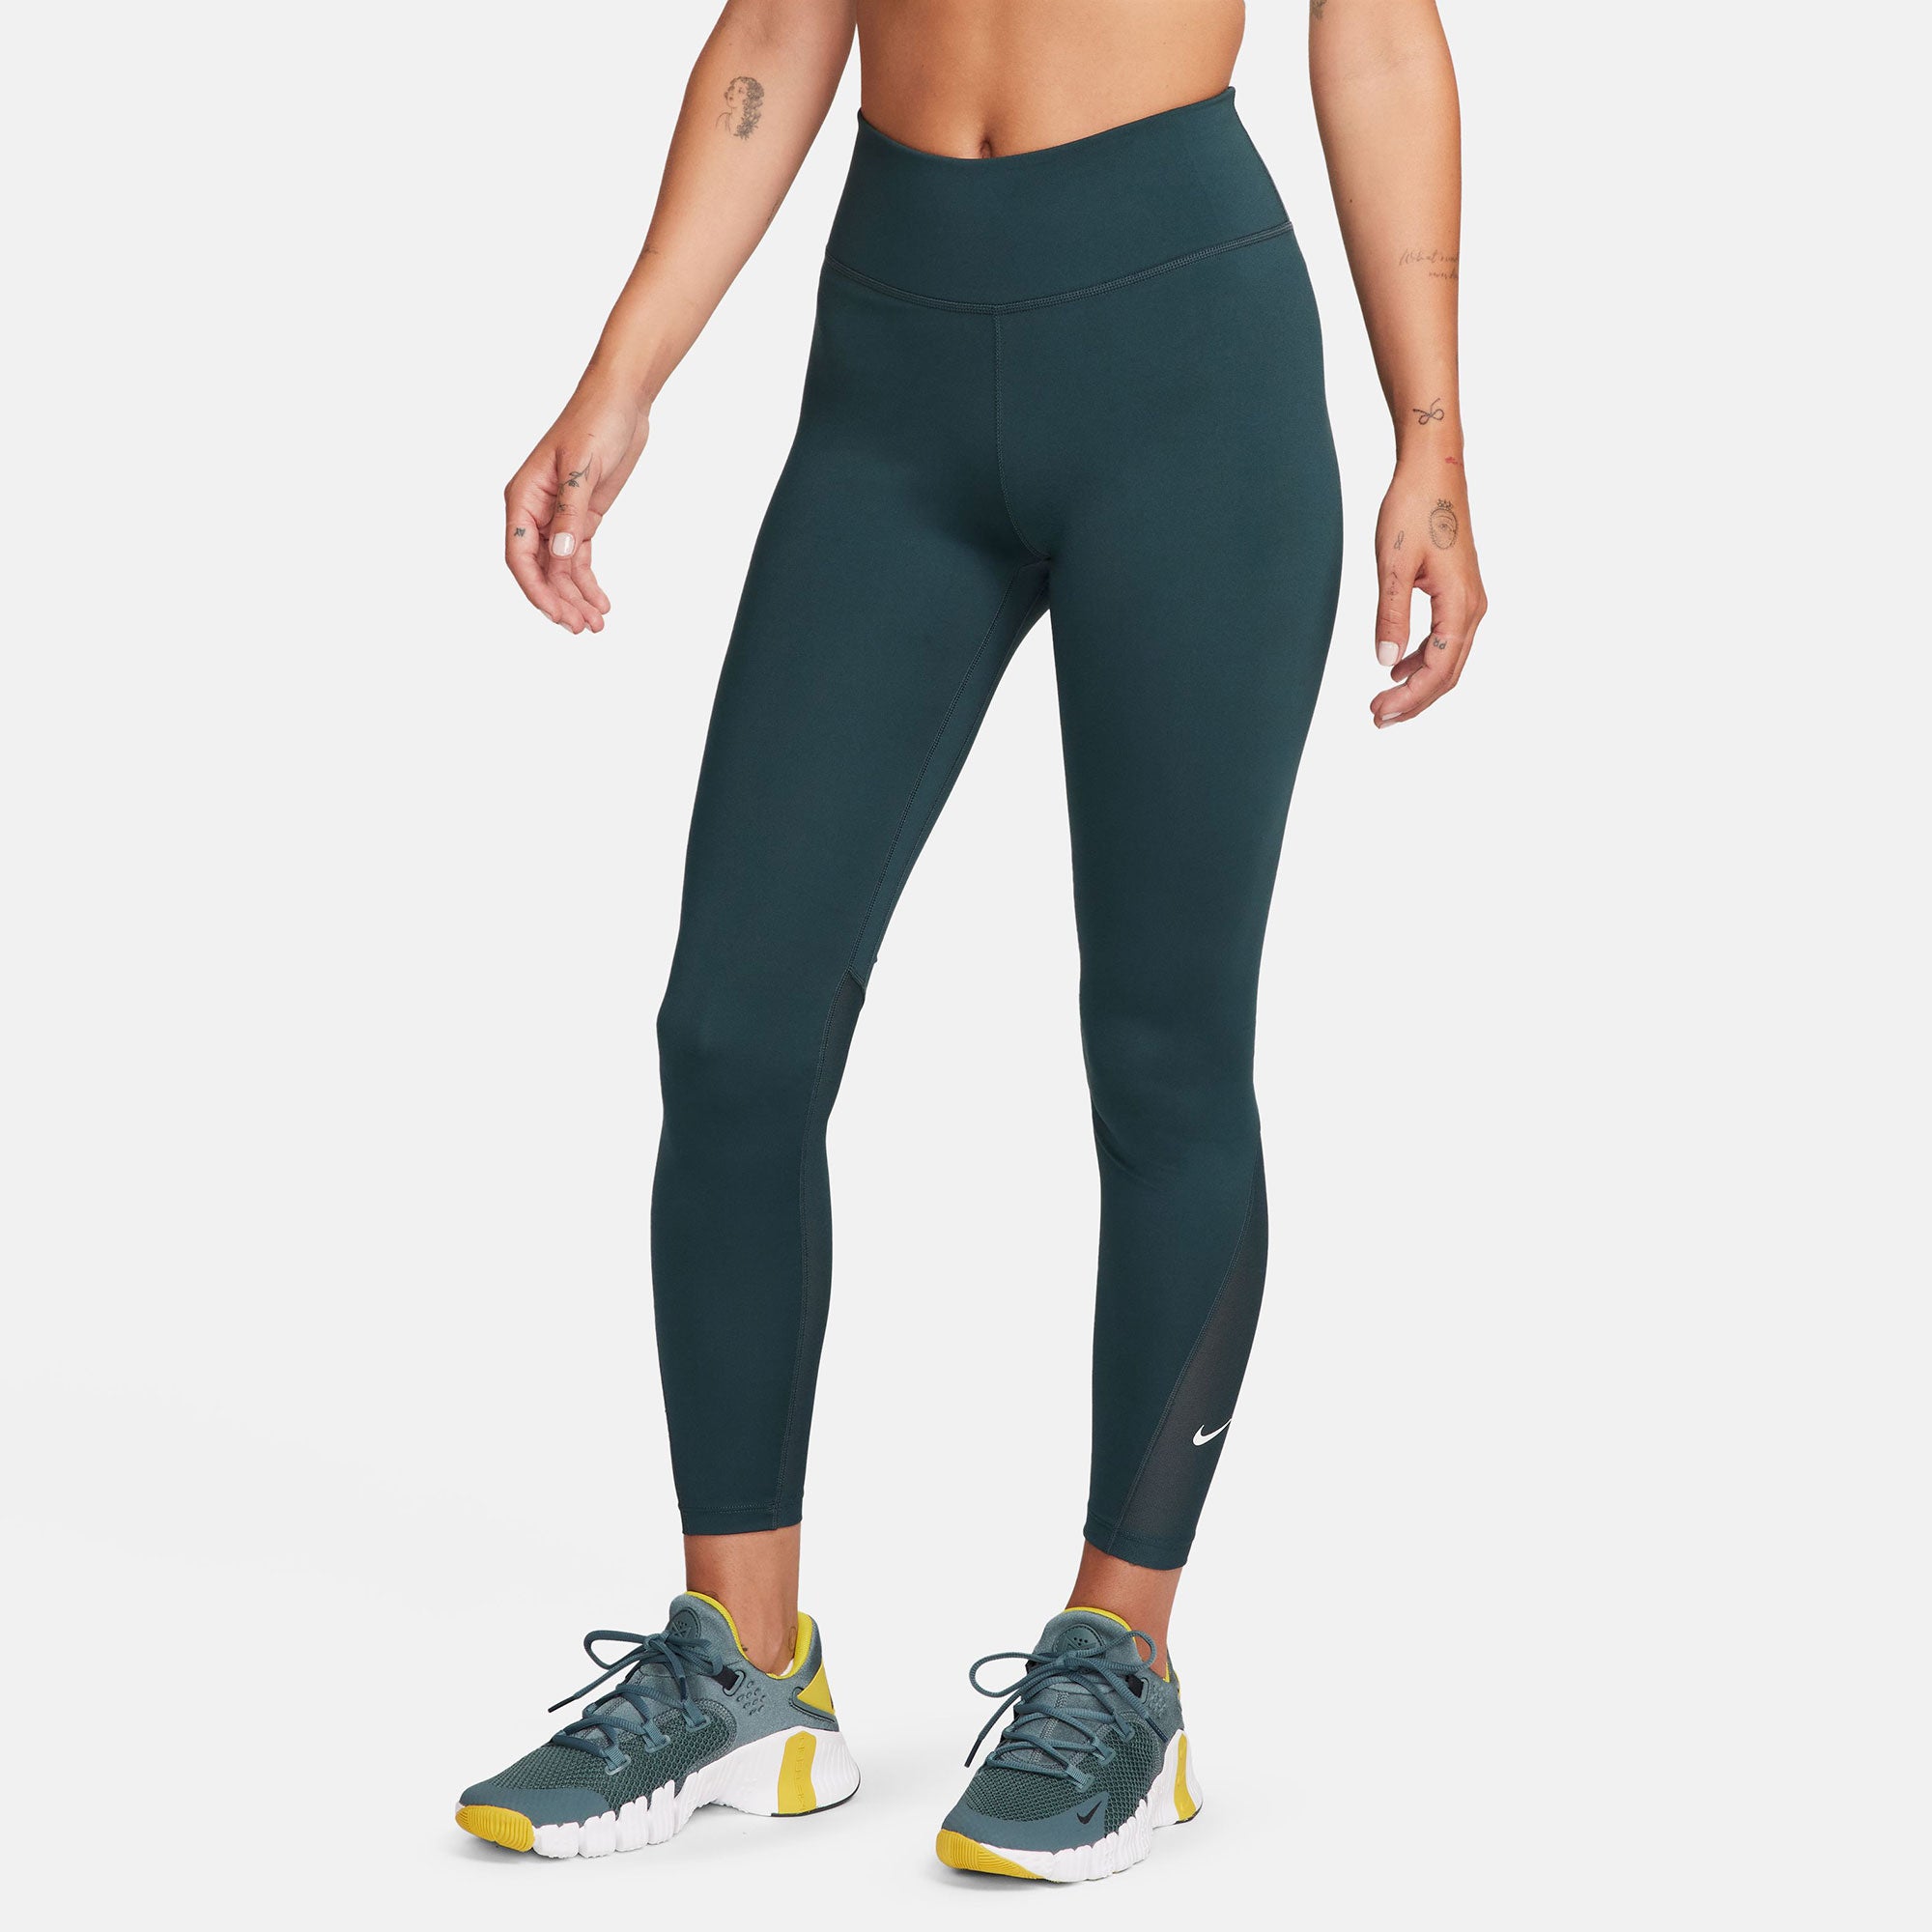 Leggings All Women's Tennis - Shoes, Clothing & Accessories